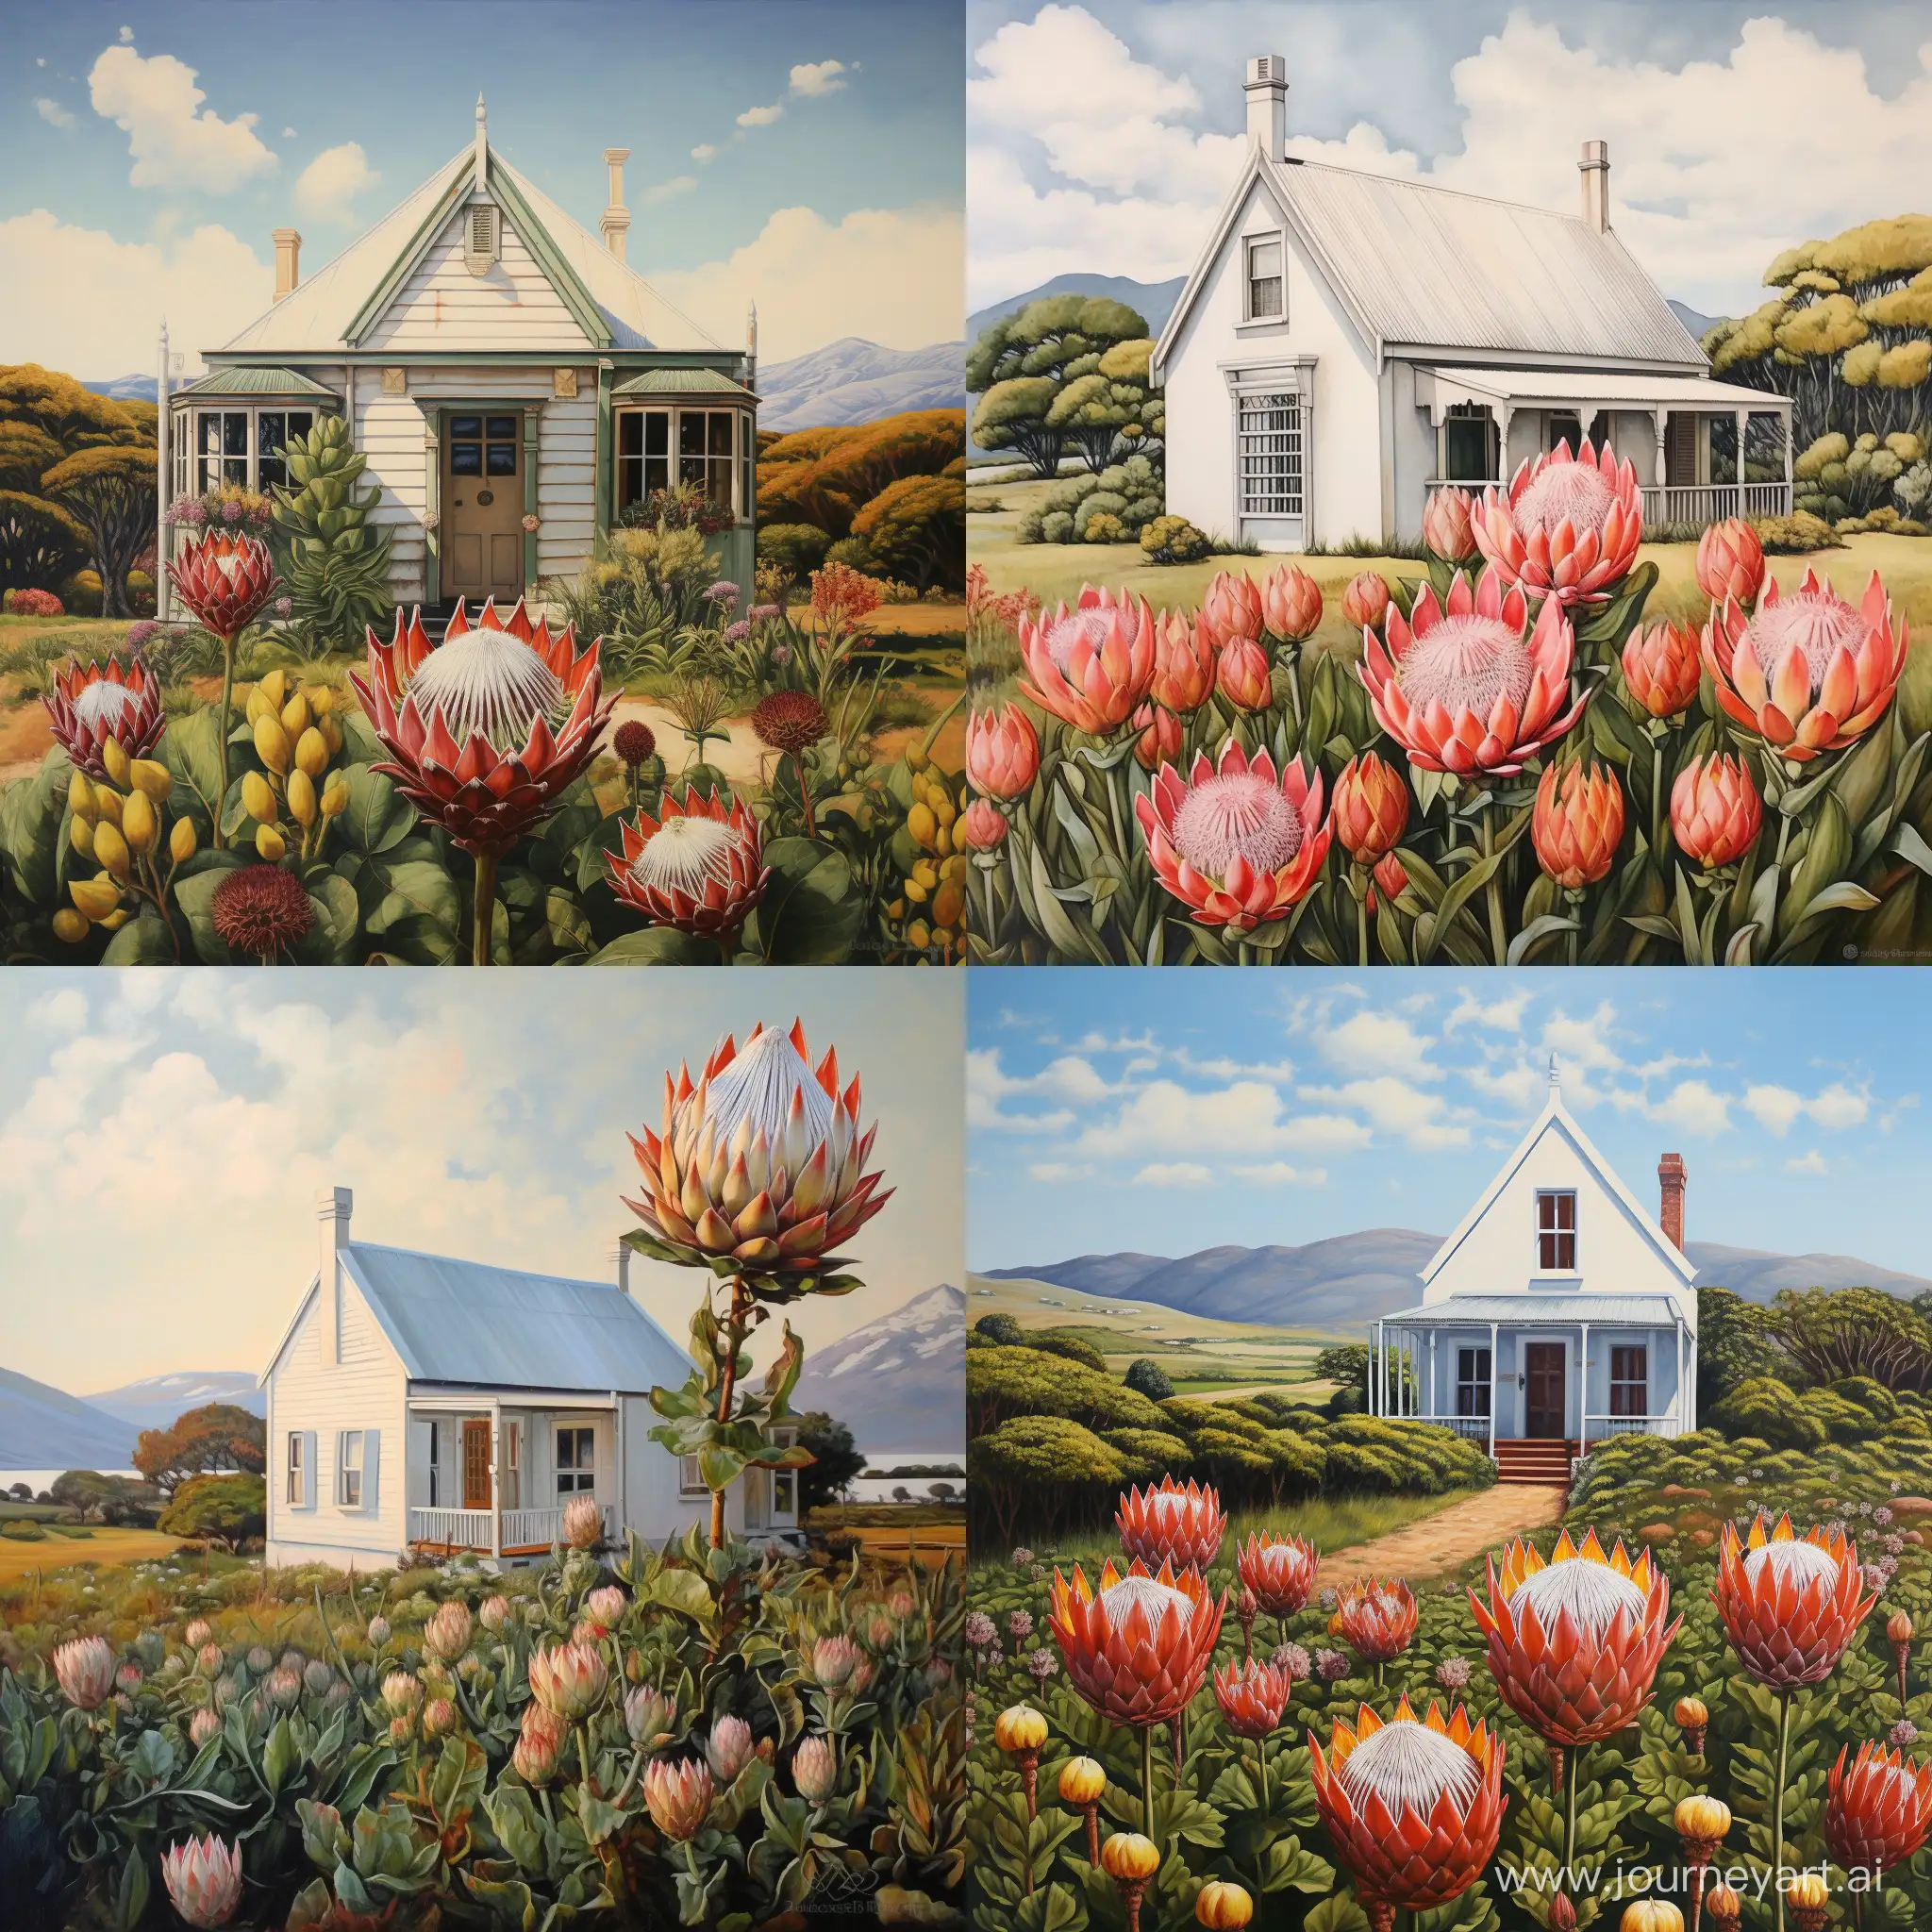 Charming-Cape-Dutch-House-Surrounded-by-Vibrant-Proteas